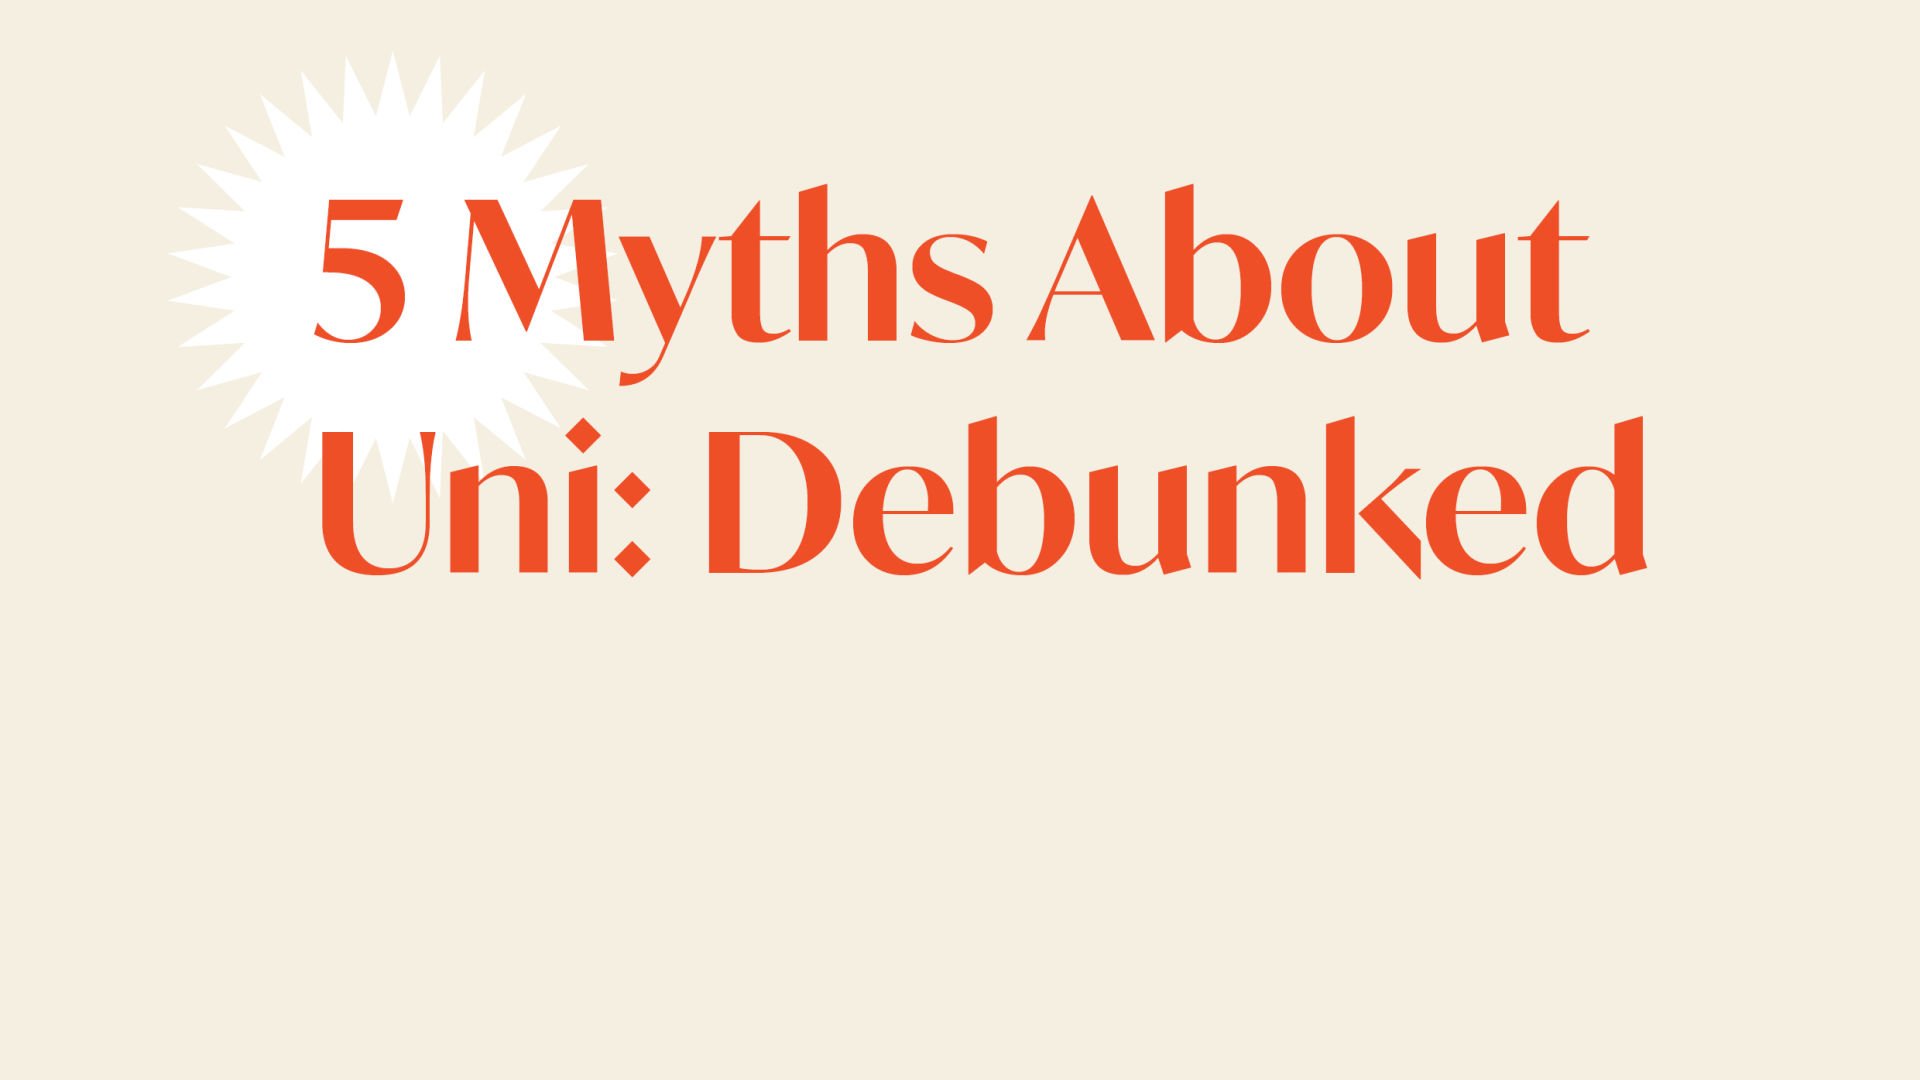 5 Myths About Uni: Debunked